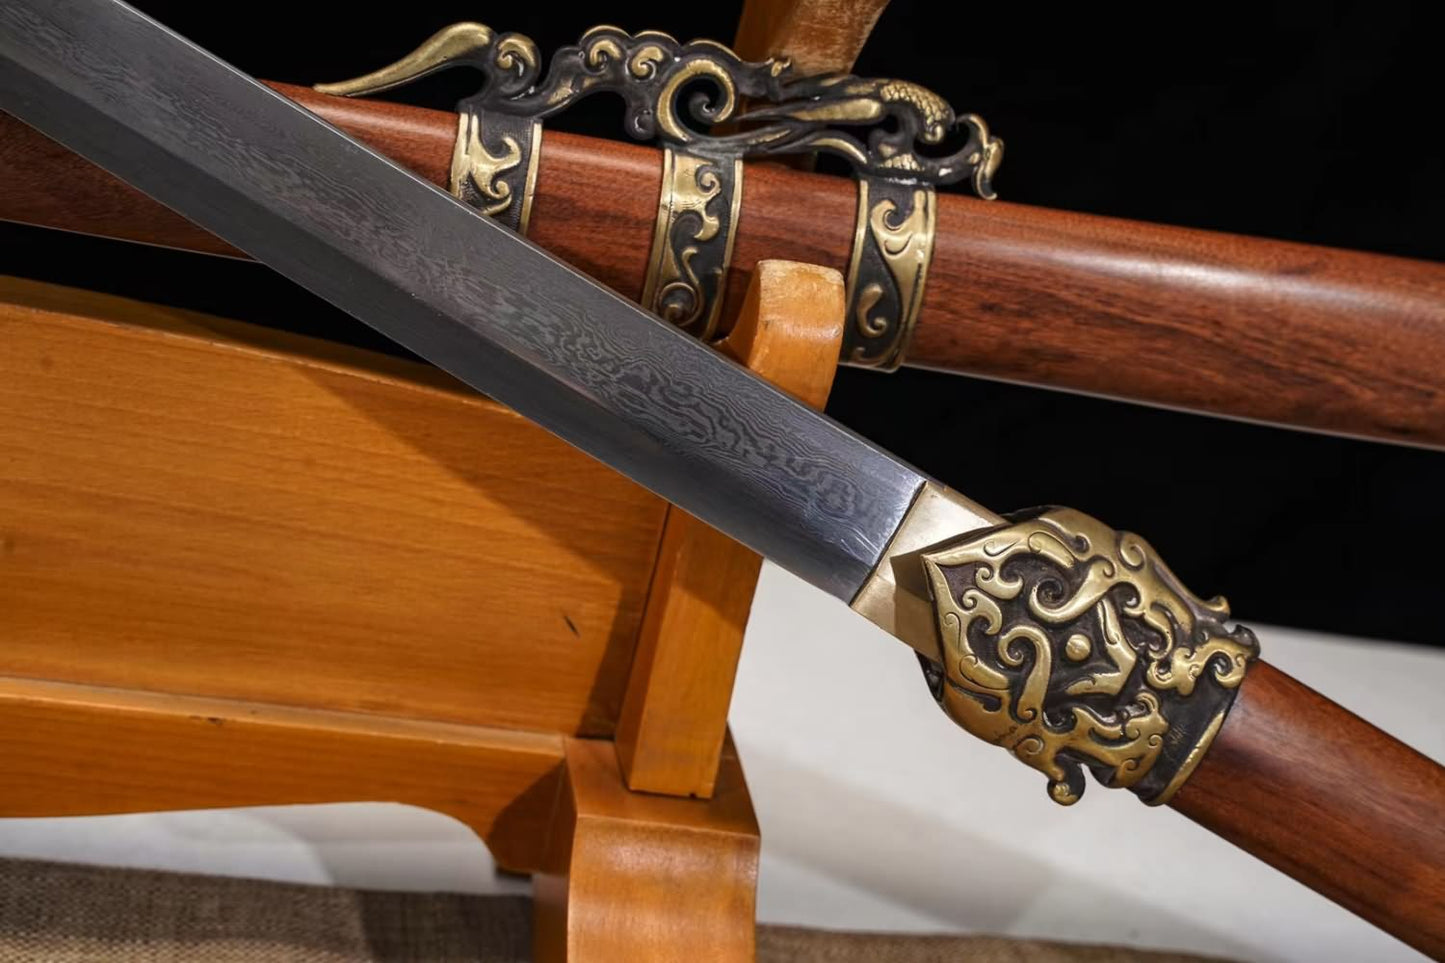 Rosefinch Tang dao Swords-Handcrafted Damascus Steel Blade with Brass Fittings Rosewood Scabbard